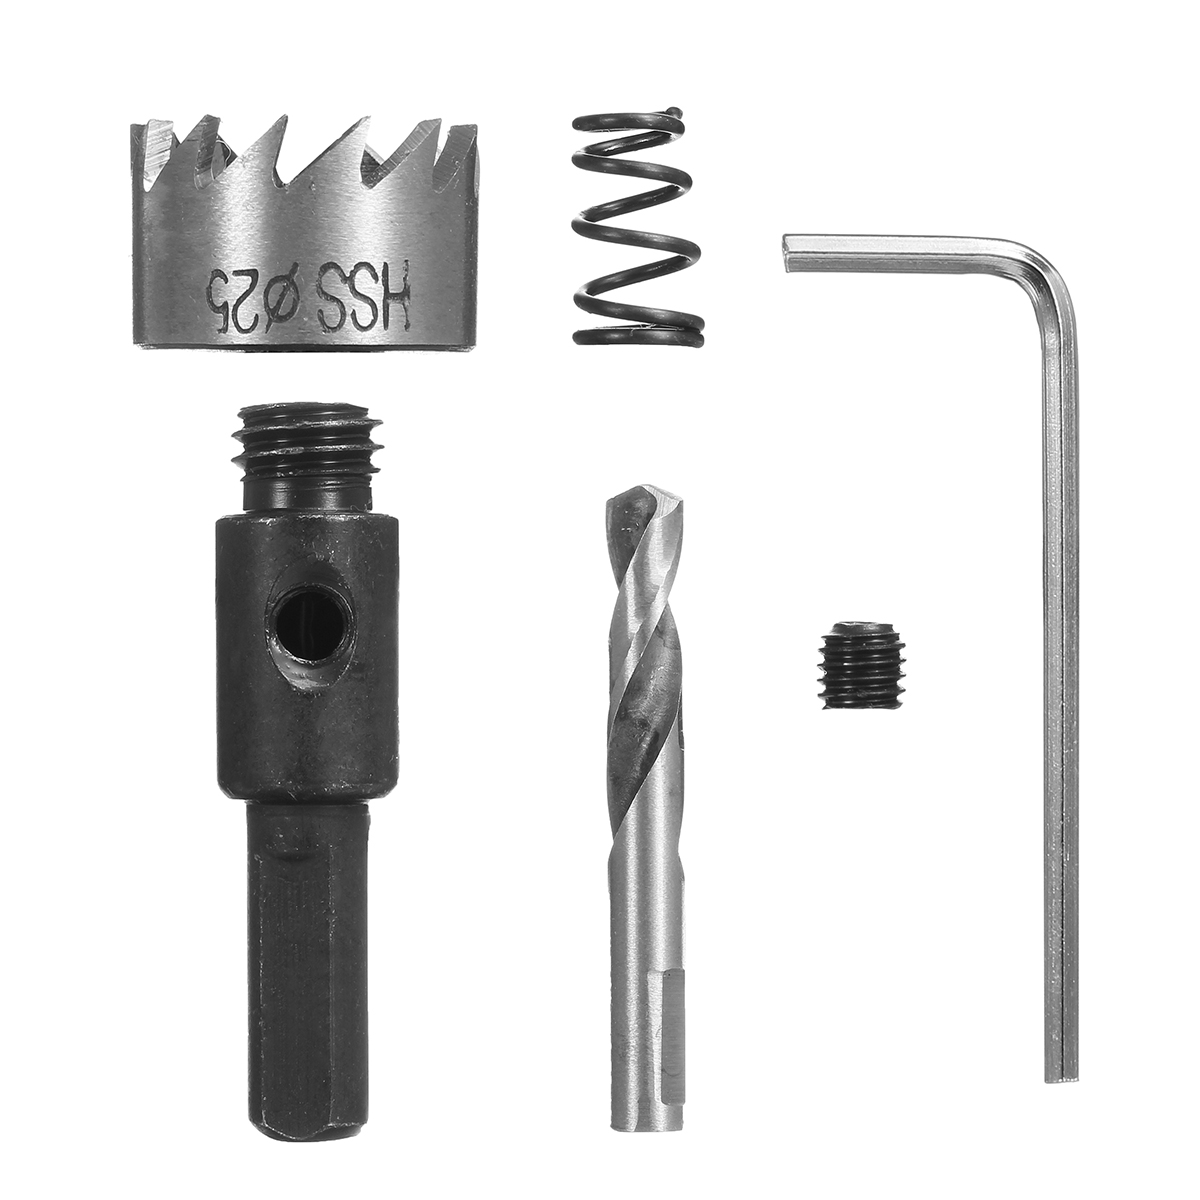 5Pcs-Saw-Tooth-HSS-Drill-Bit-Hole-Saw-Set-Stainless-Steel-Metal-Alloy-16-30mm-1203295-6